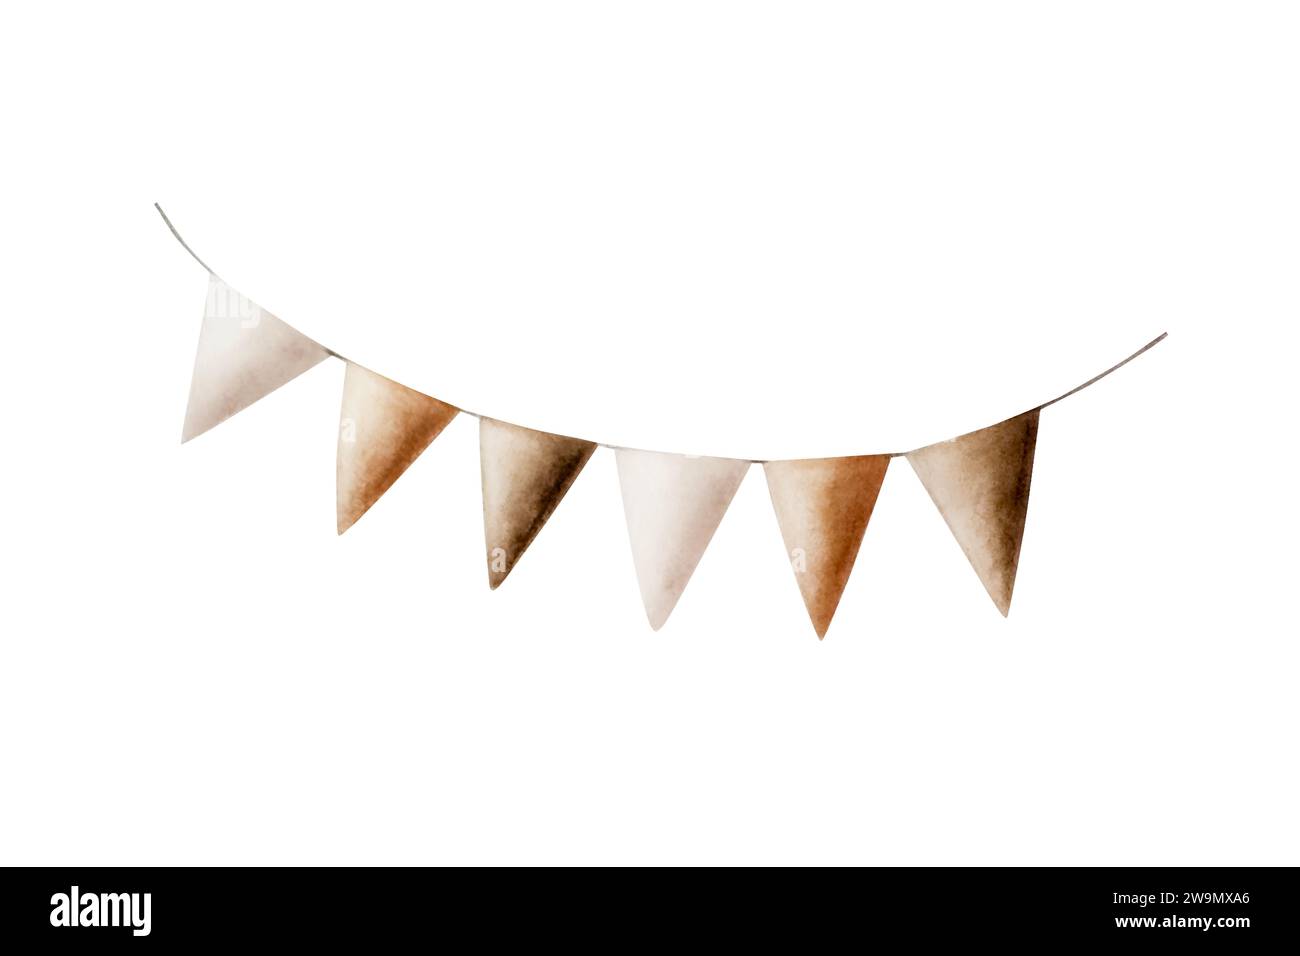 Watercolor birthday garland of brown and beige flags. Hand drawn triangle illustration isolated on white background. Holiday and festive element for d Stock Photo